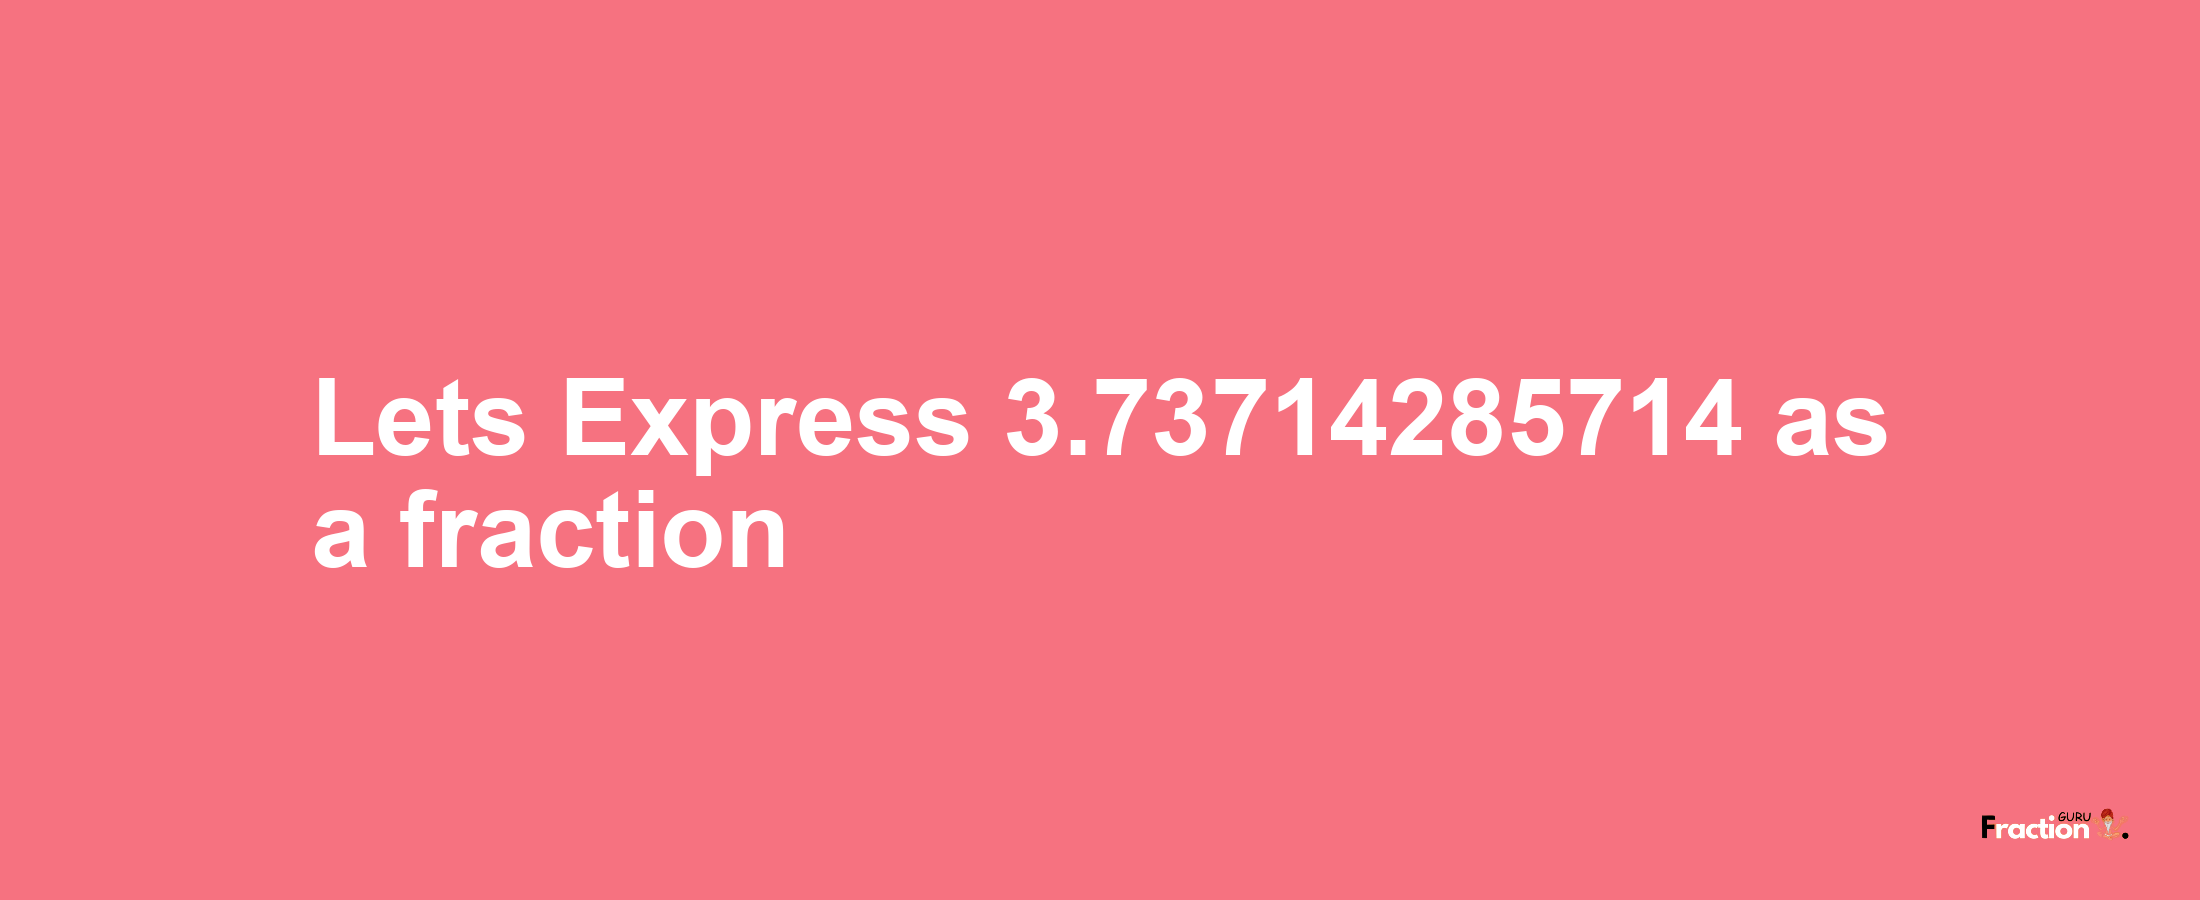 Lets Express 3.73714285714 as afraction